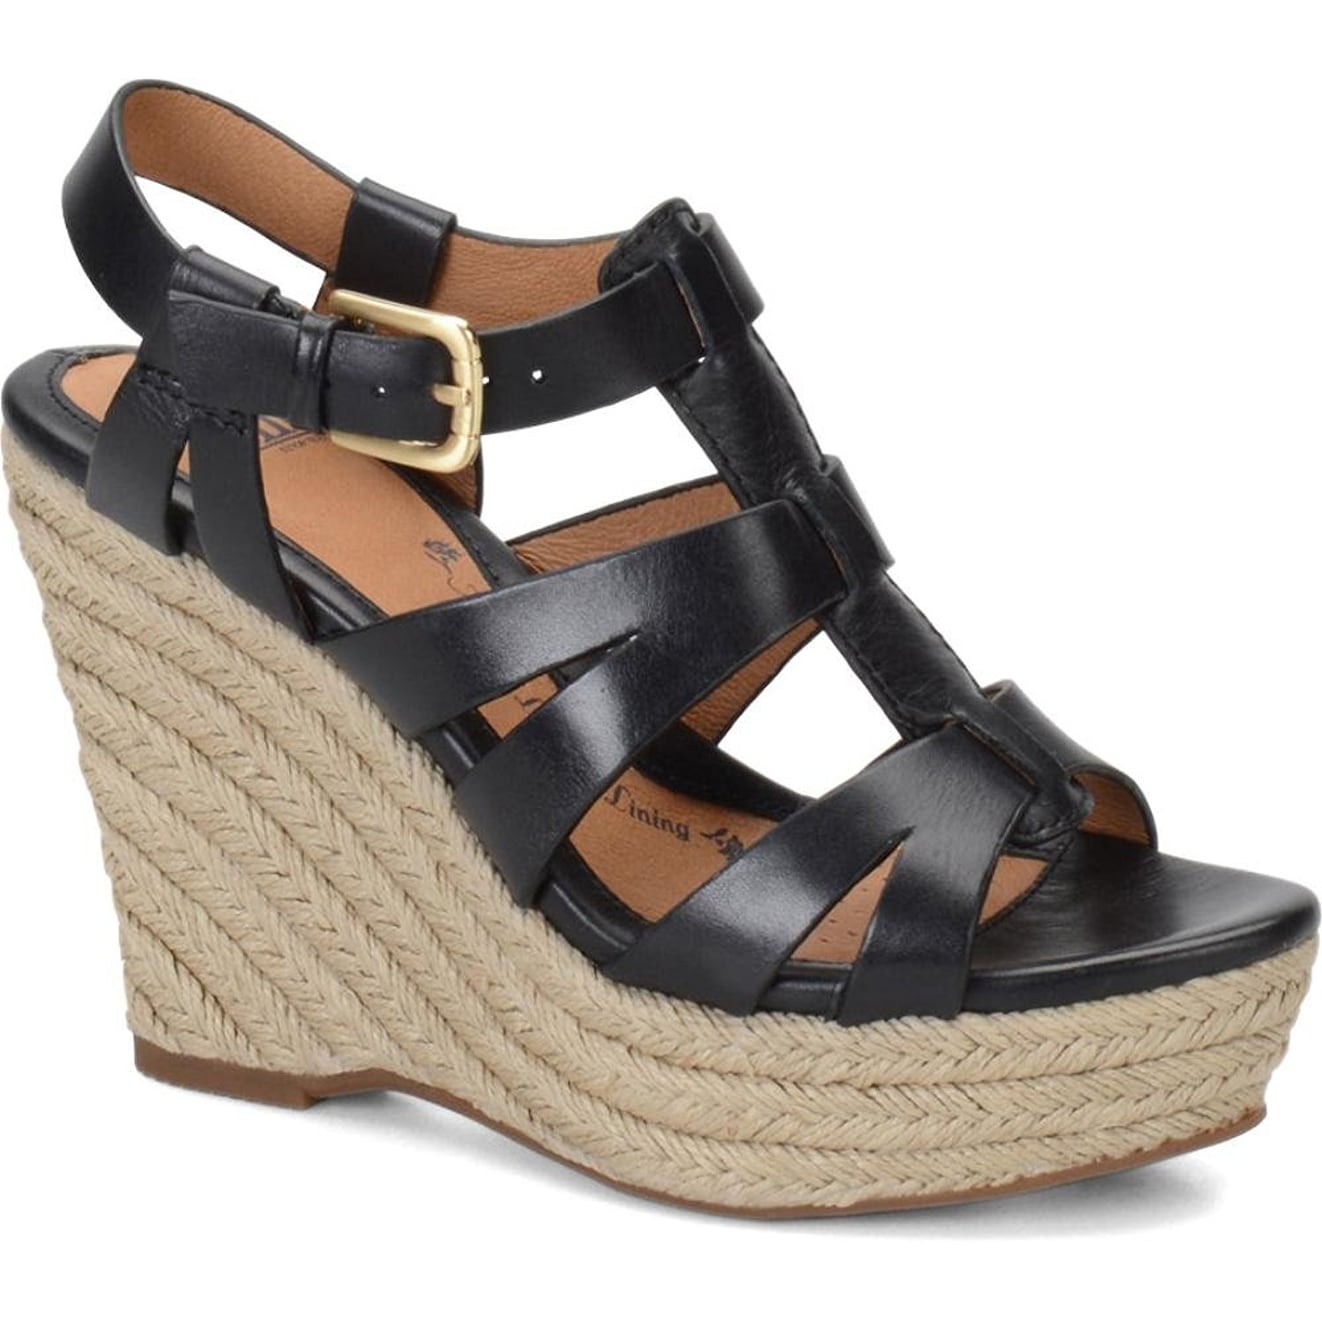 Shop Sofft Women's Pahana Wedges Ankle 